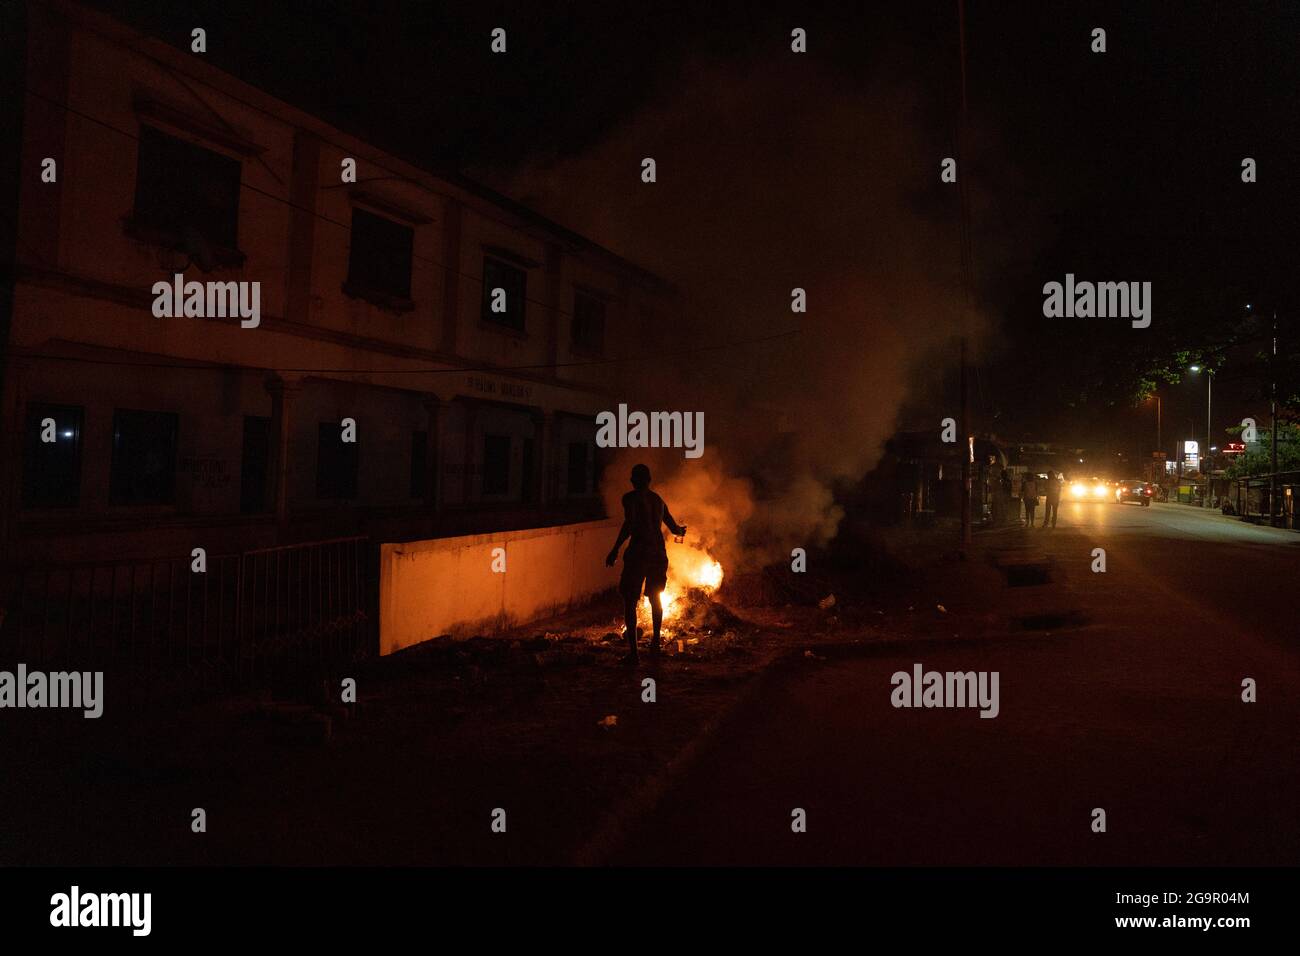 Man sets fire on Street in West Africa Stock Photo